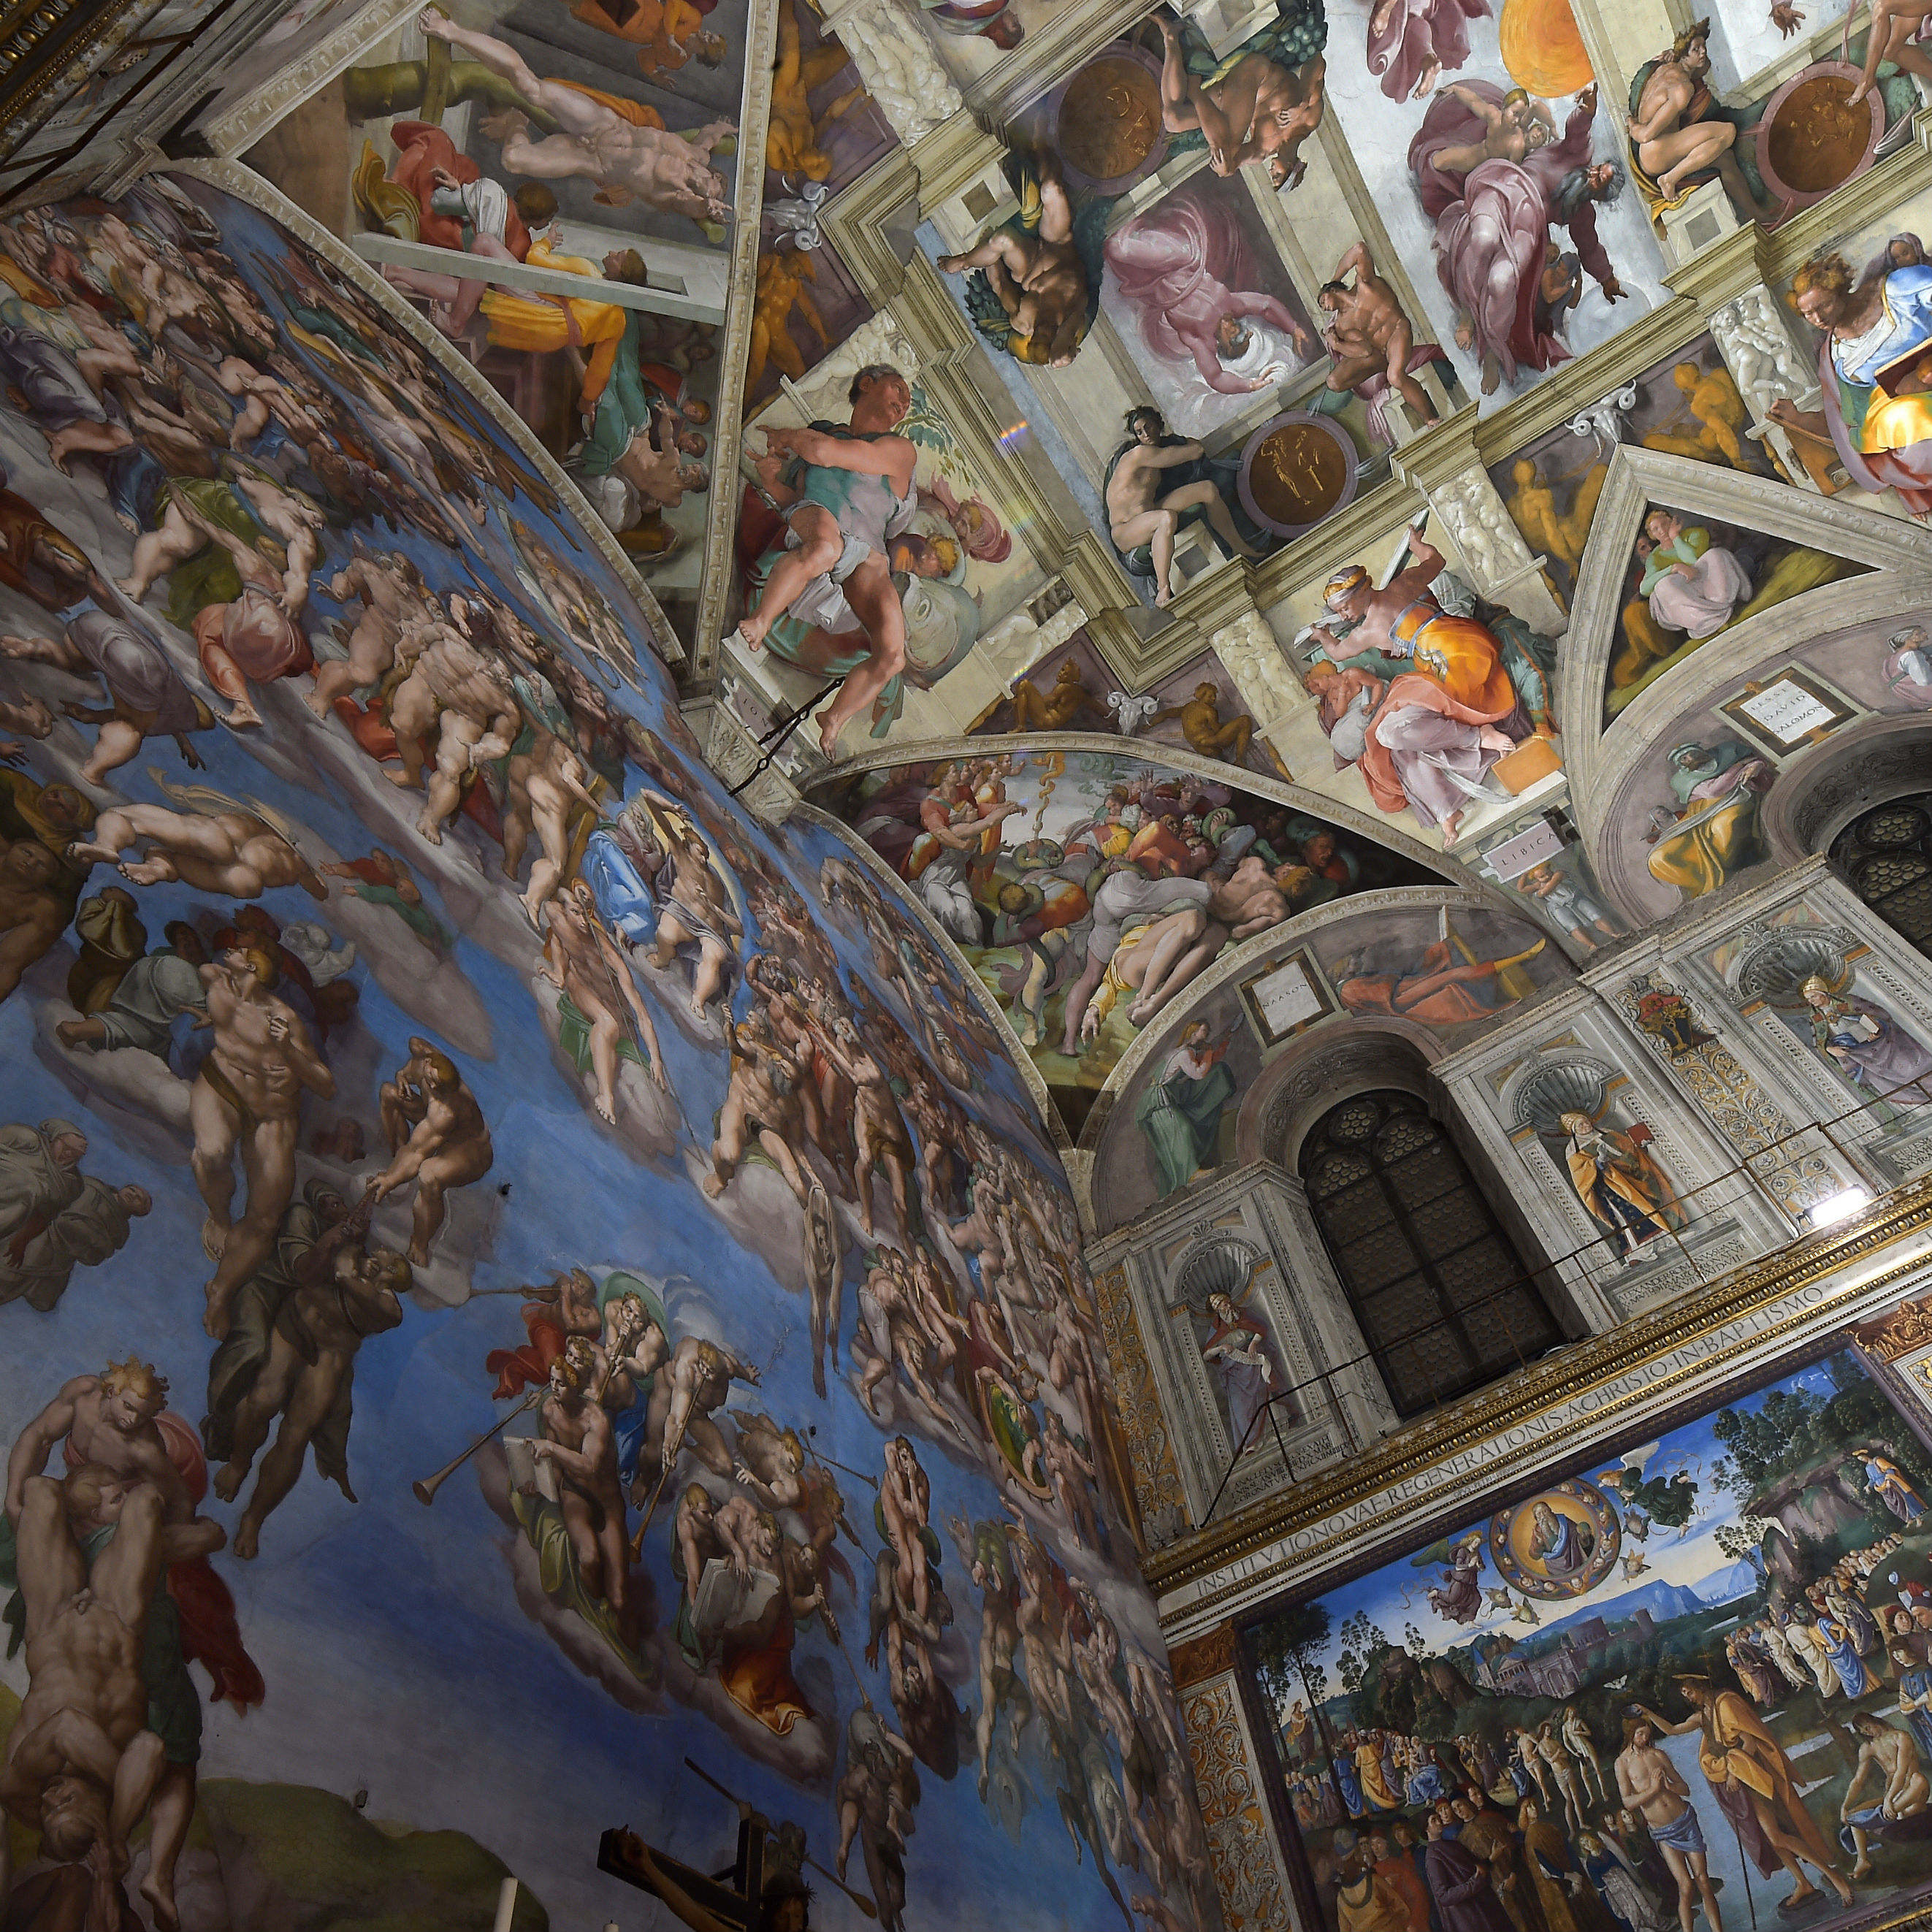 Michelangelo frescoes reproduced with 99.9 per cent accuracy in Vatican digital photo project 